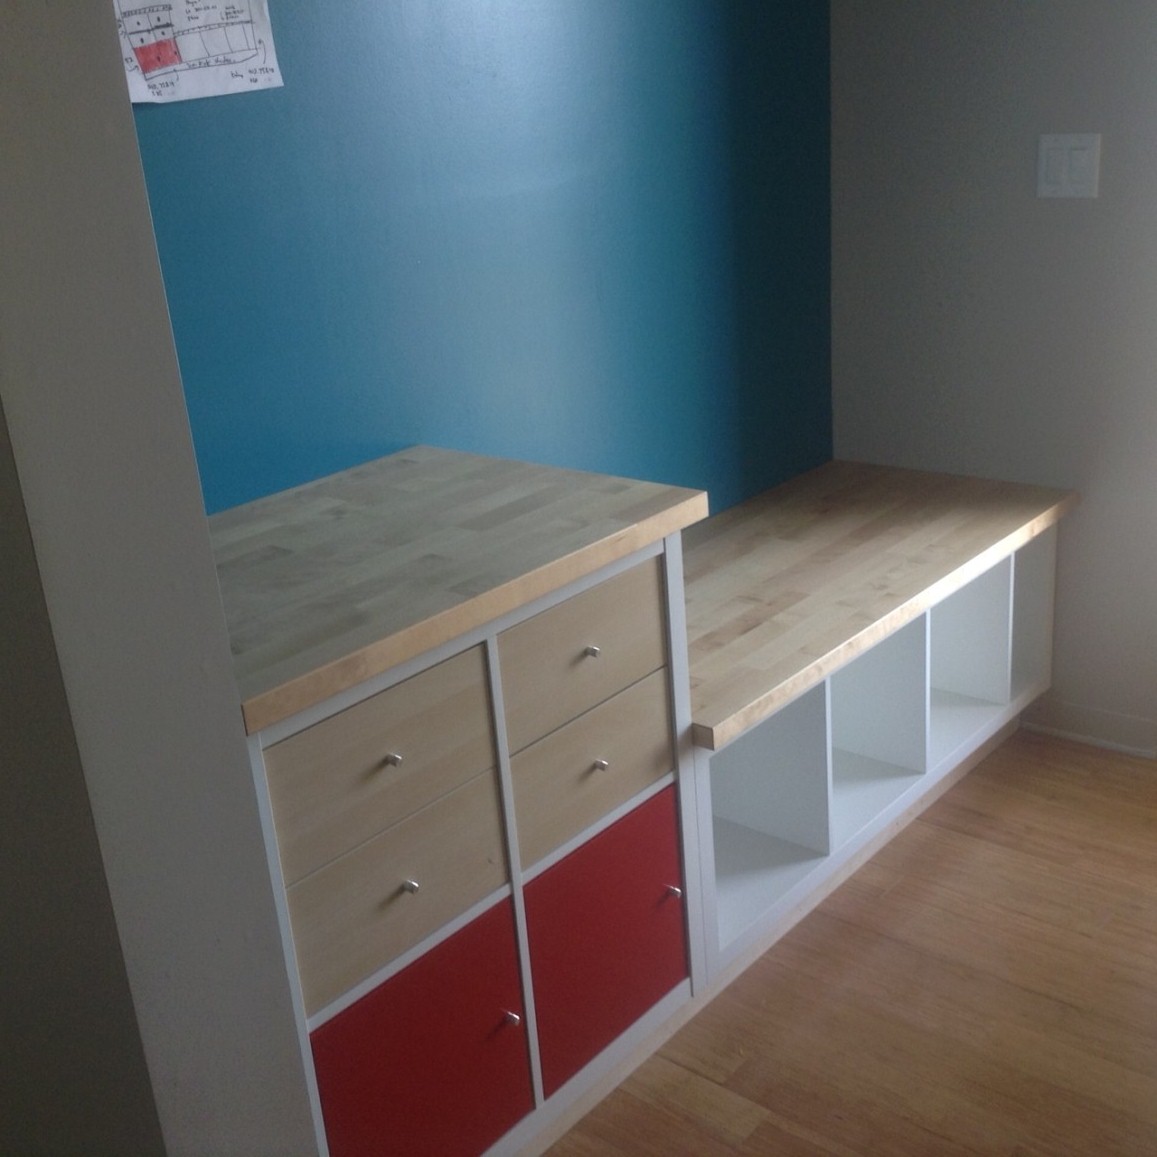 Built-in bench with storage and wooden top (perfect solution for a mudroom) (via www.ikeahackers.net)